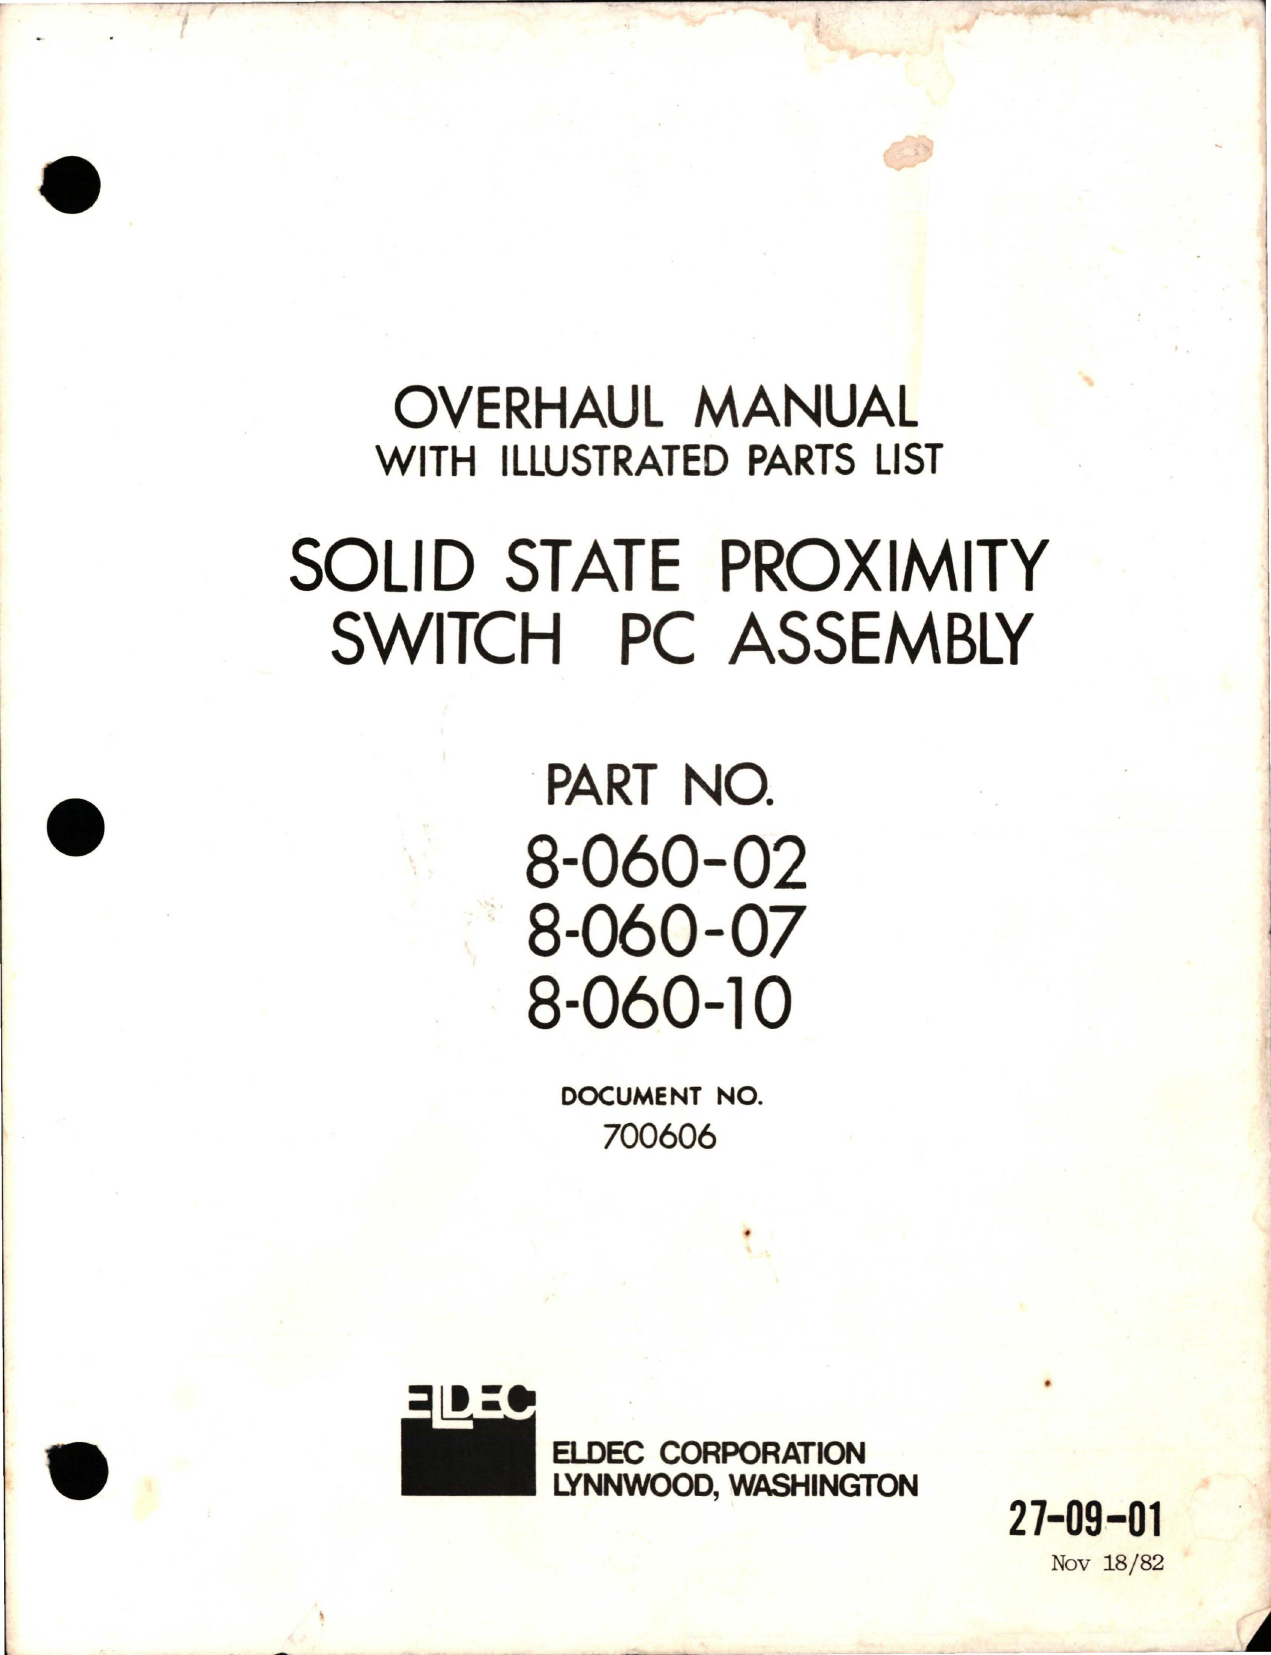 Sample page 1 from AirCorps Library document: Overhaul with Illustrated Parts List for Solid State Proximity Switch PC Assembly - Parts 8-060-02, 8-060-07, and 8-060-10